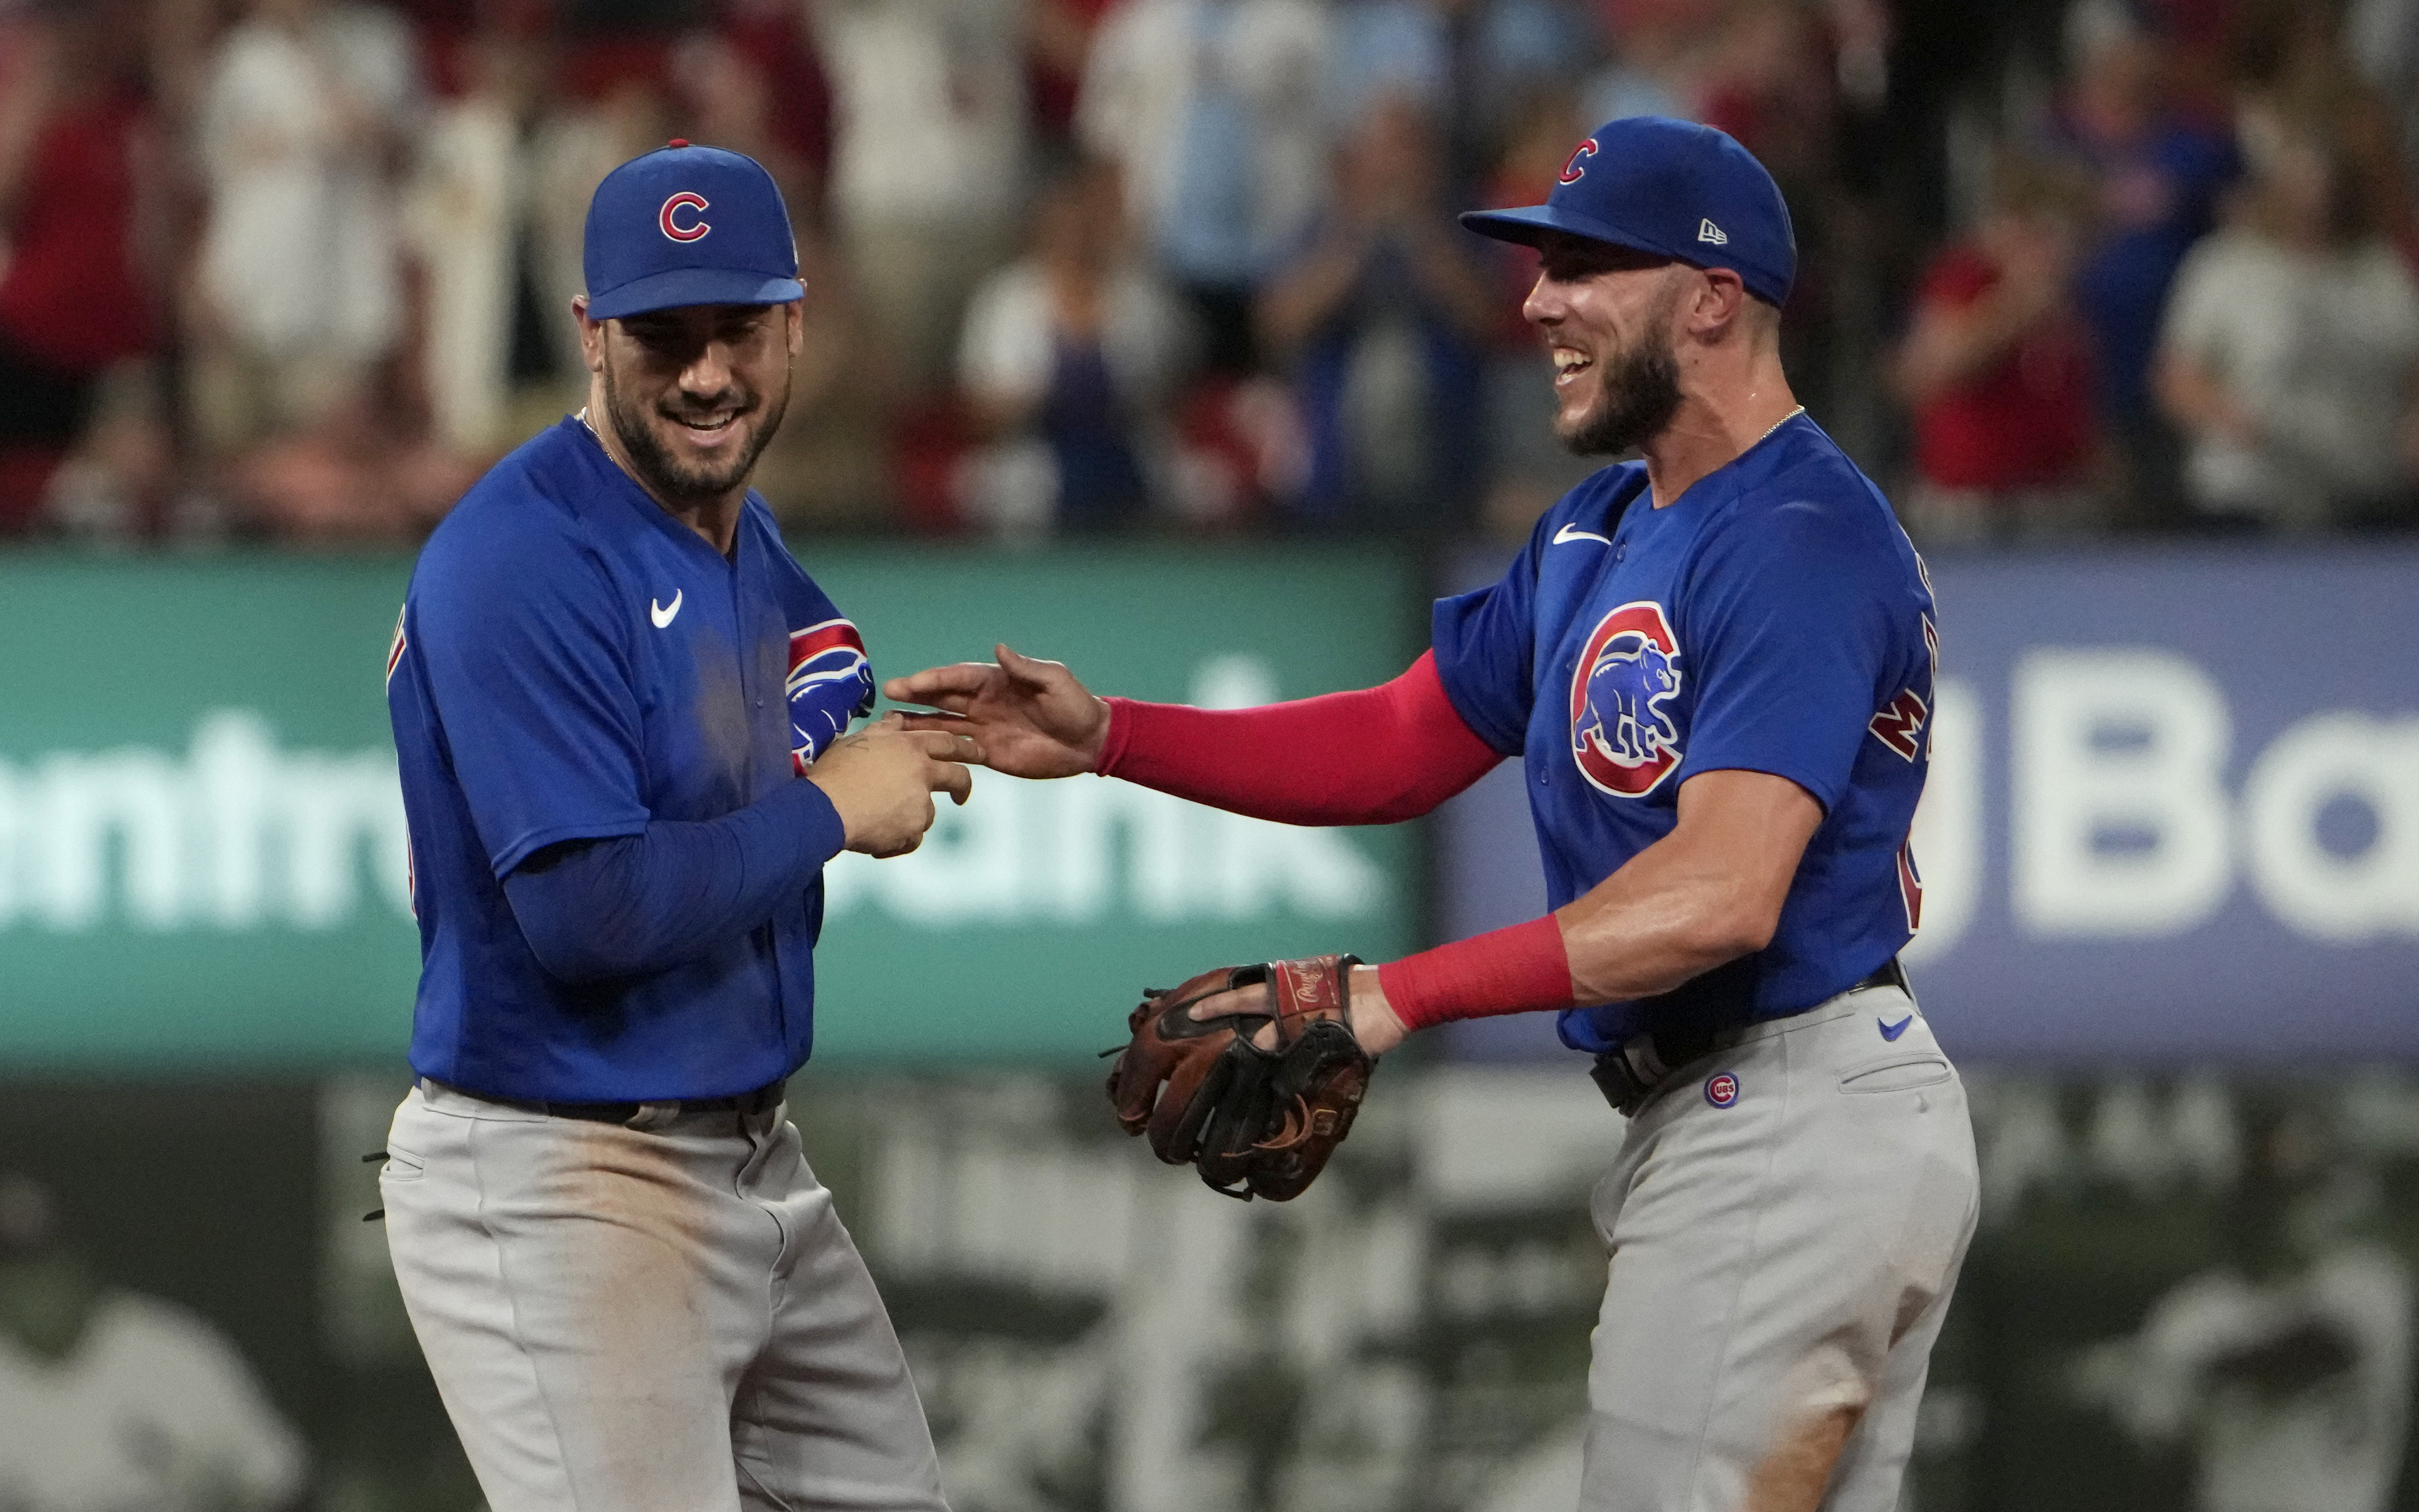 WATCH: Cubs win series against Braves, sixth straight series win